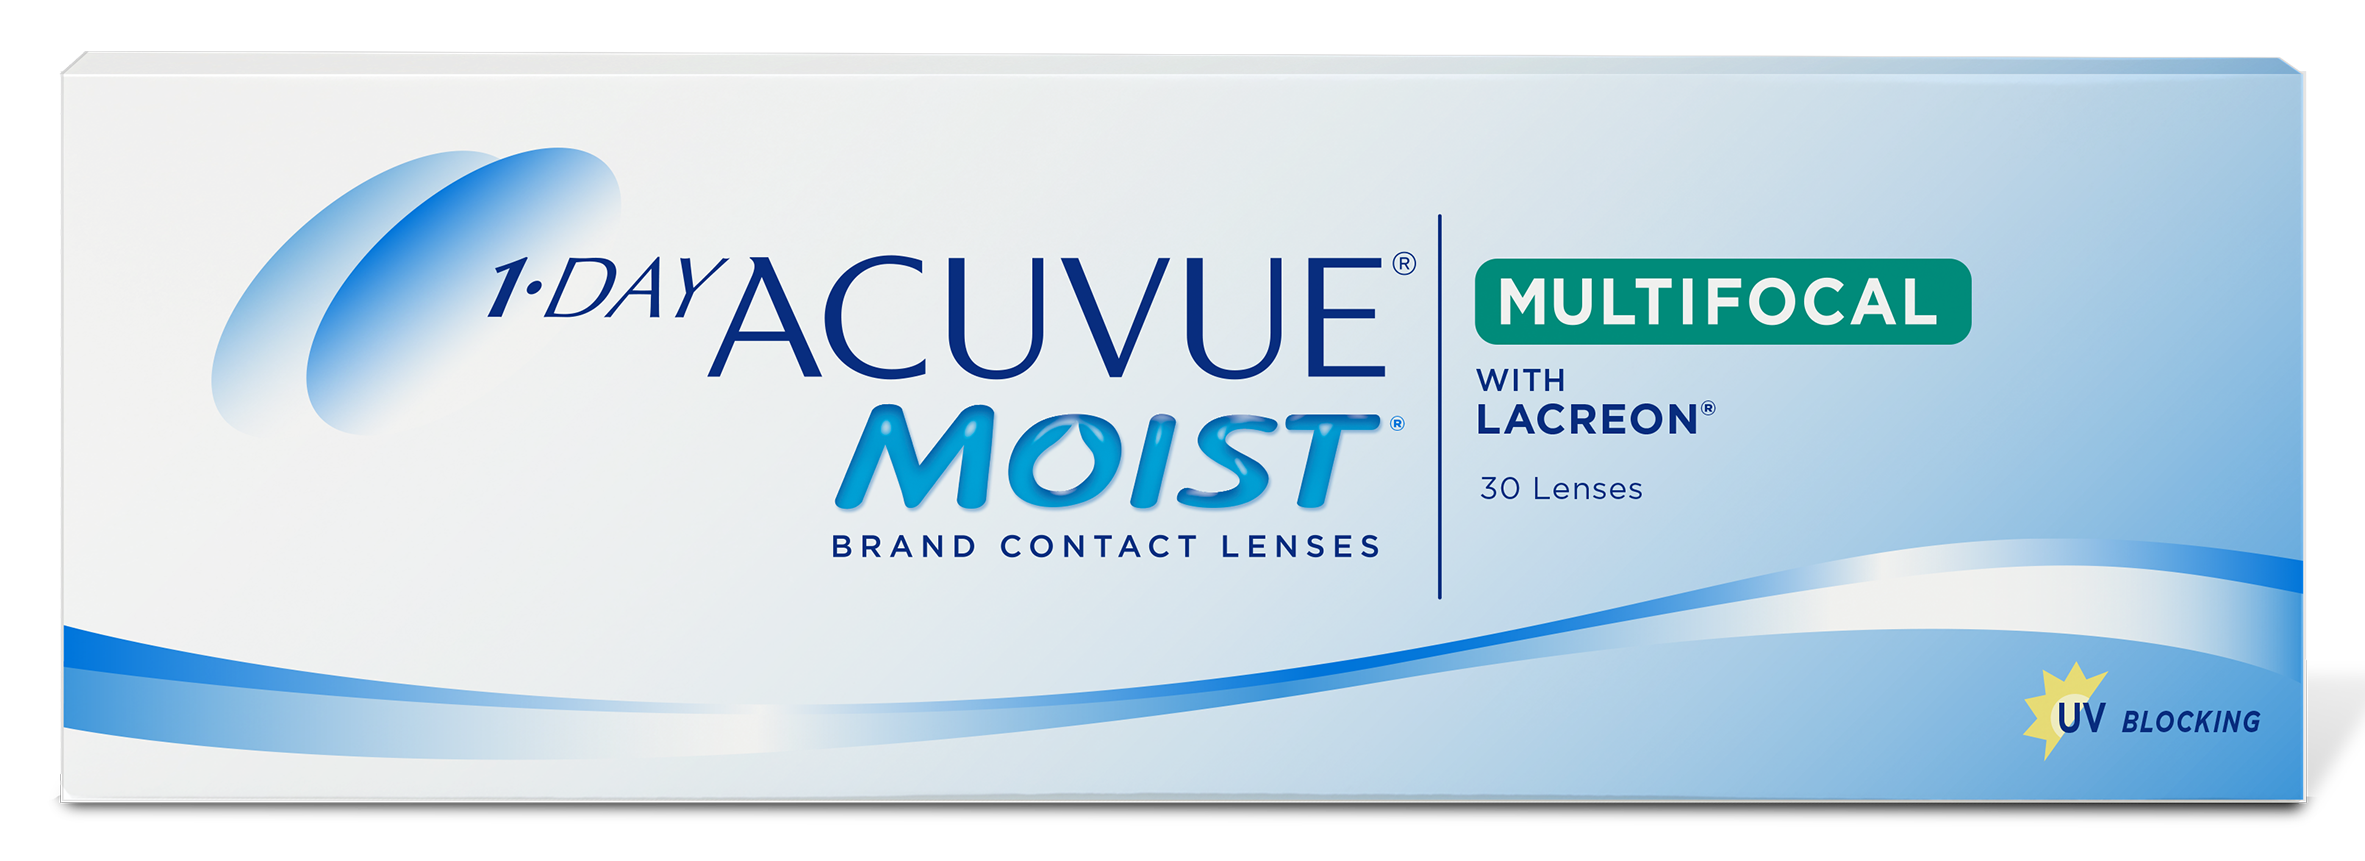 difficulty-focusing-up-close-it-could-be-presbyopia-acuvue